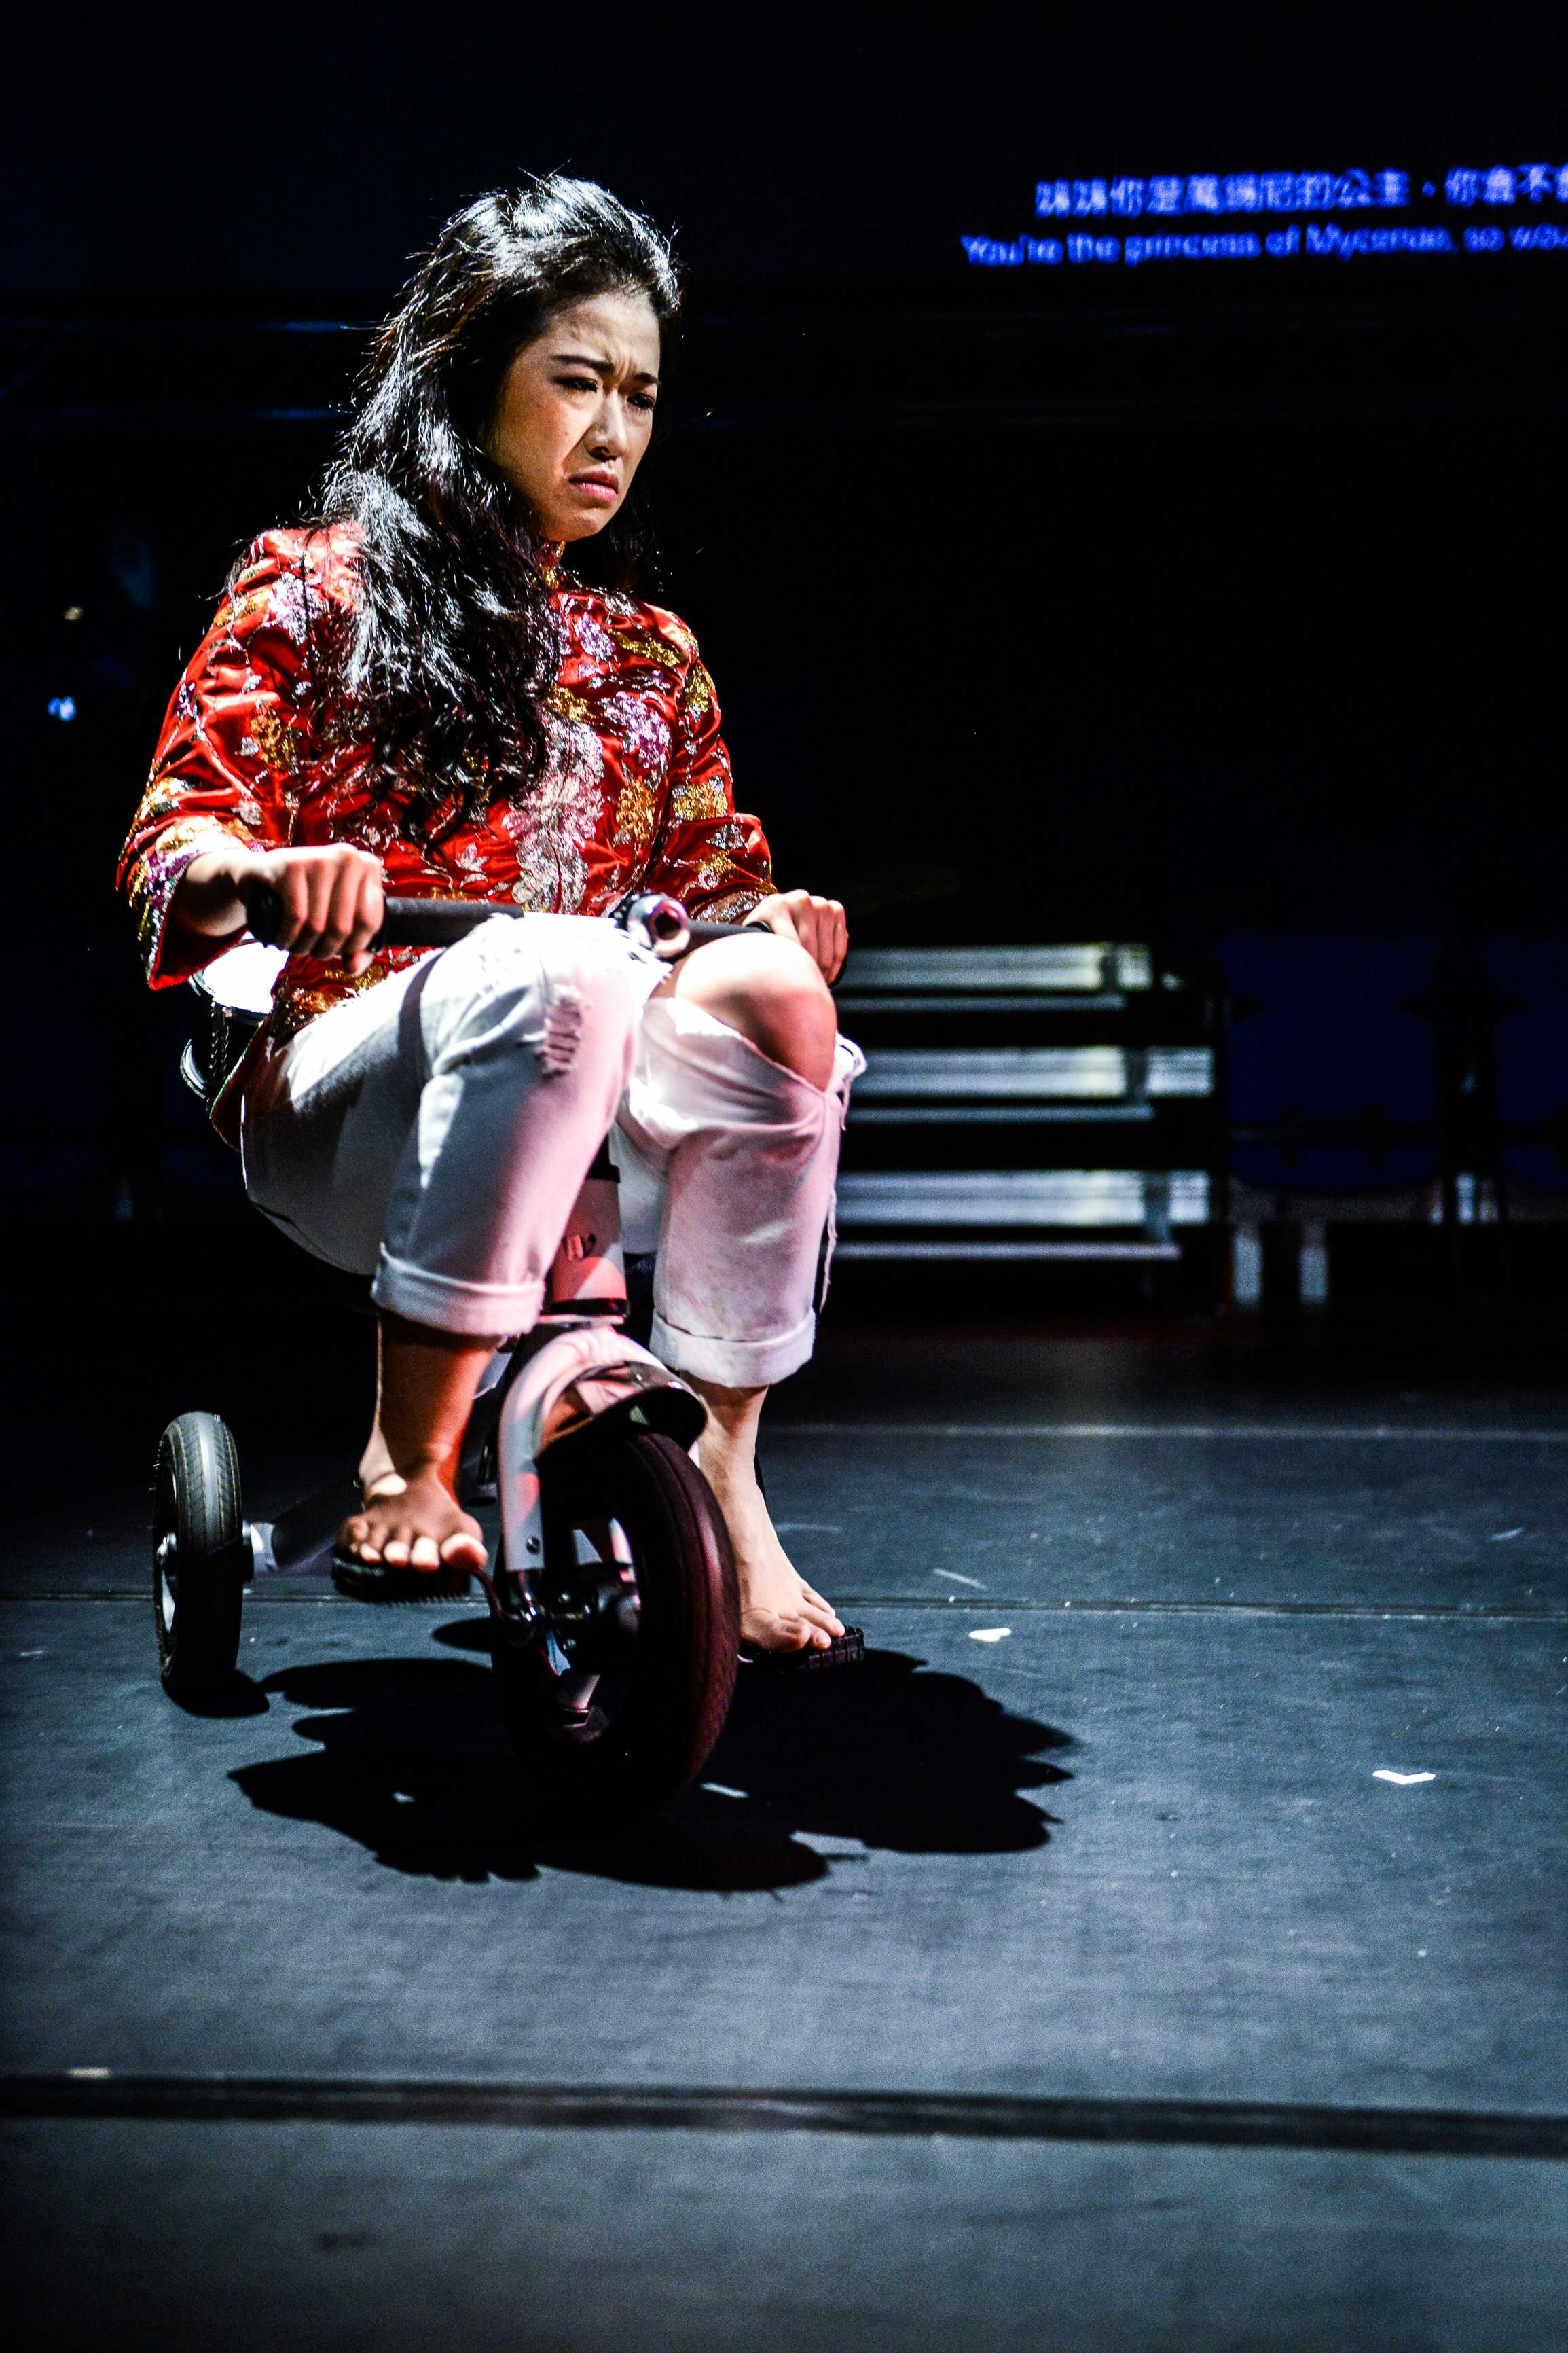 The Furies Variations, Rooftop Productions Theatre Hong Kong 2018 | Featuring: Chan Wing Shuen | Tagged as: Show, The Furies Variations | Photo: Fung Wai Sun |  (Rooftop Productions • Hong Kong Theatre Company)  | Rooftop Productions • Hong Kong Theatre Company